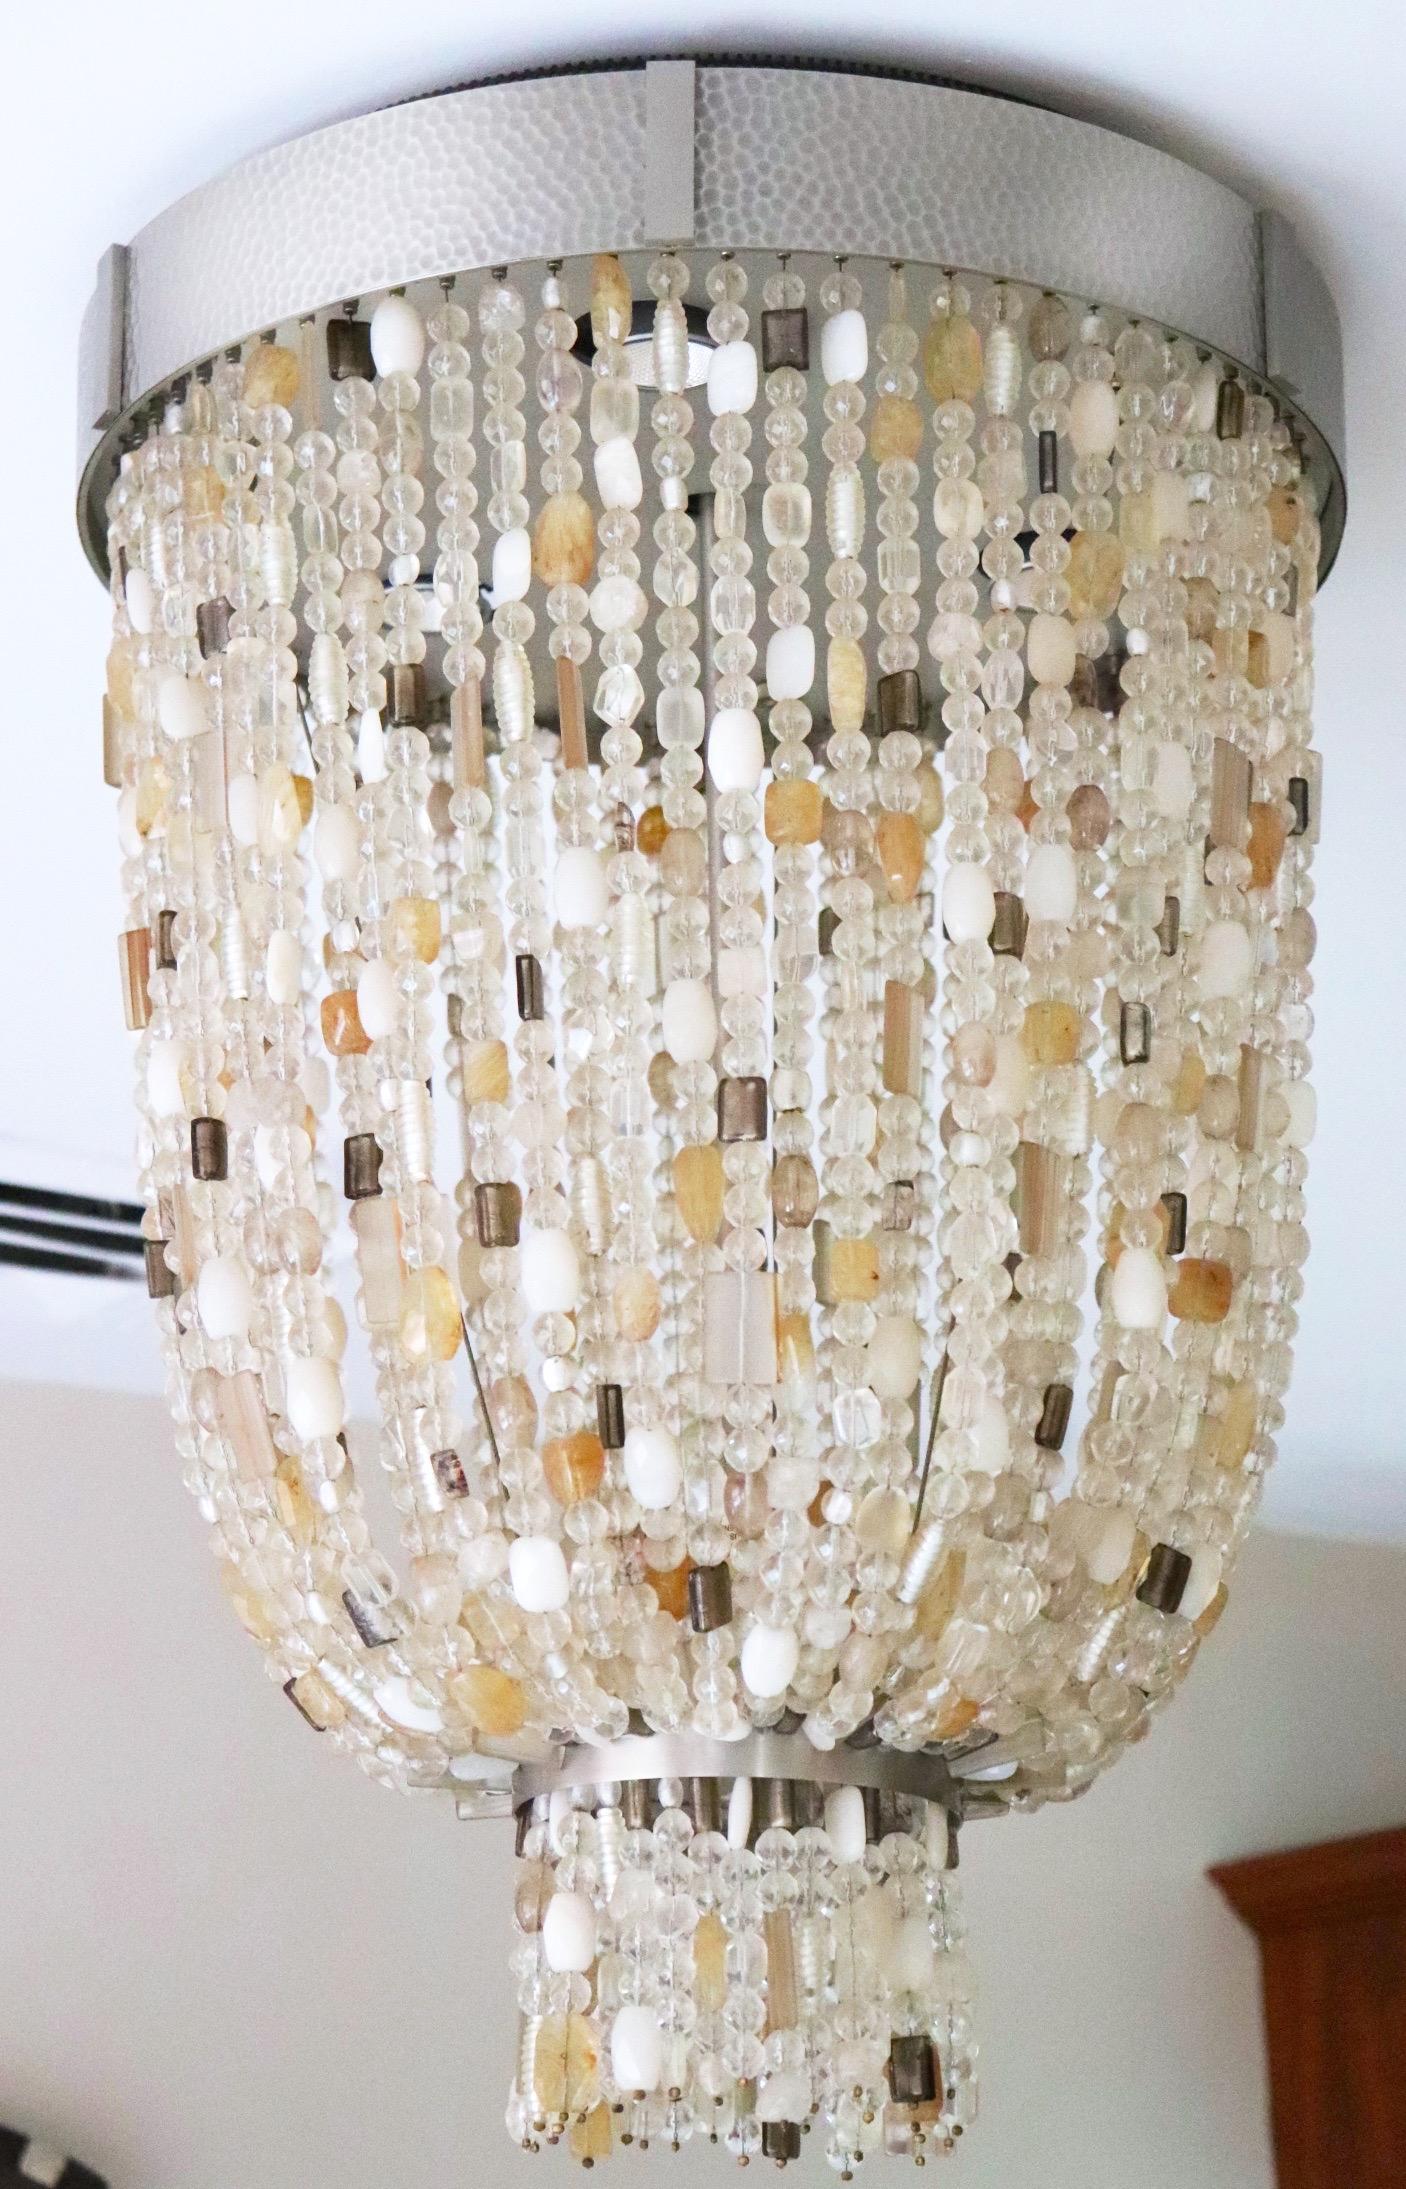 Rock crystal Murano glass bead chandelier Thomas Fuchs Boyd Lighting Lavaliere.
This Kentfield collection ceiling fixture by Thomas Fuchs for Boyd Lighting is the perfect contemporary romantic fixture with warm, neutral tones of semi-precious